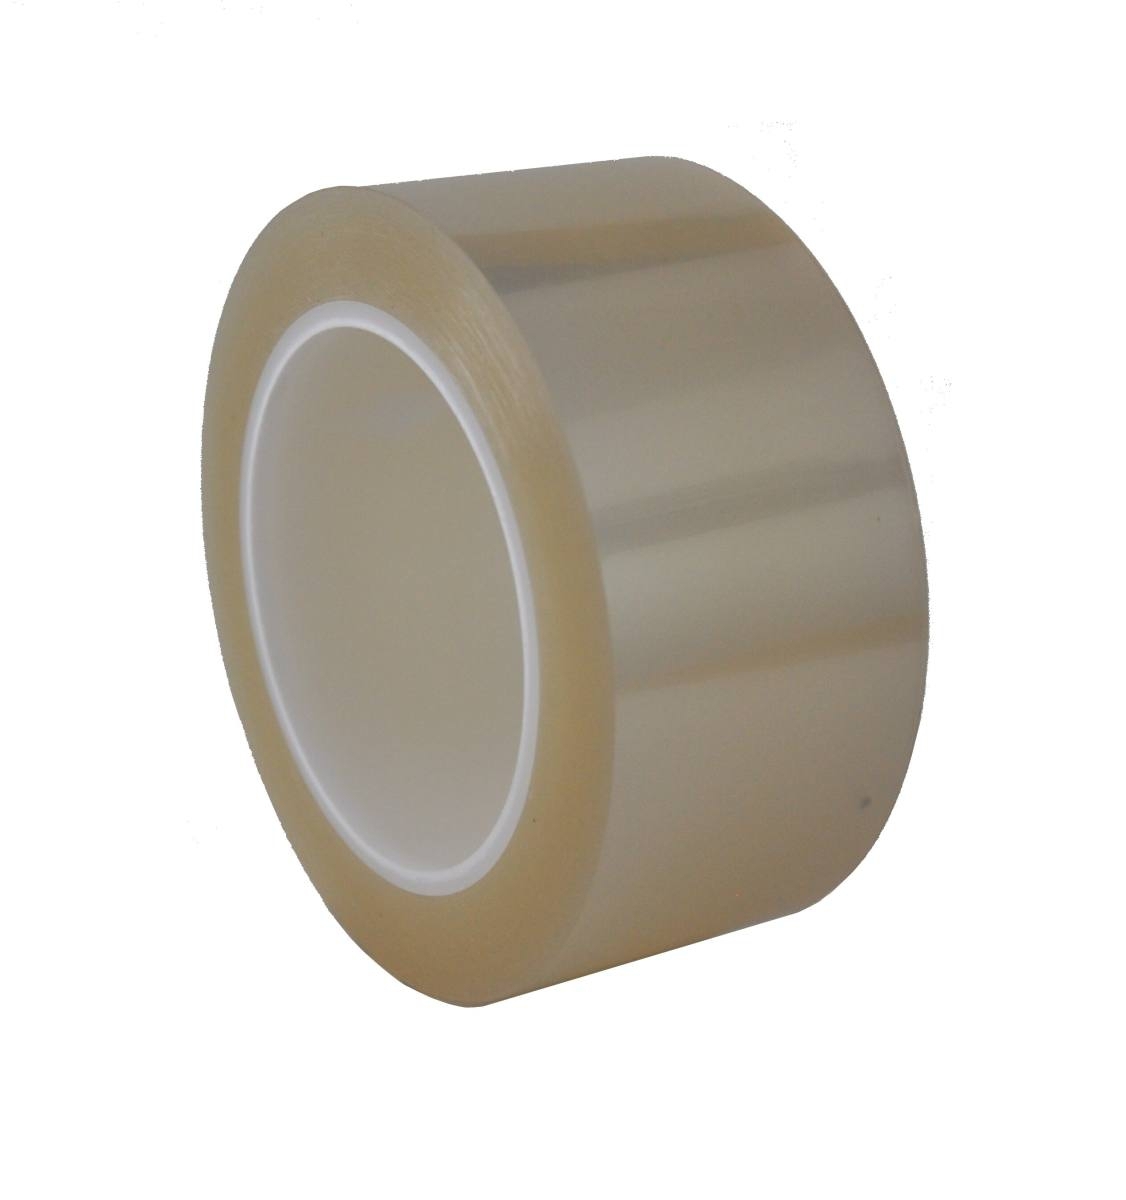 SKS fluorosilicone film, polyester film 0.075mm, 150mmx100m, coated on one side with fluorosilicone, transparent